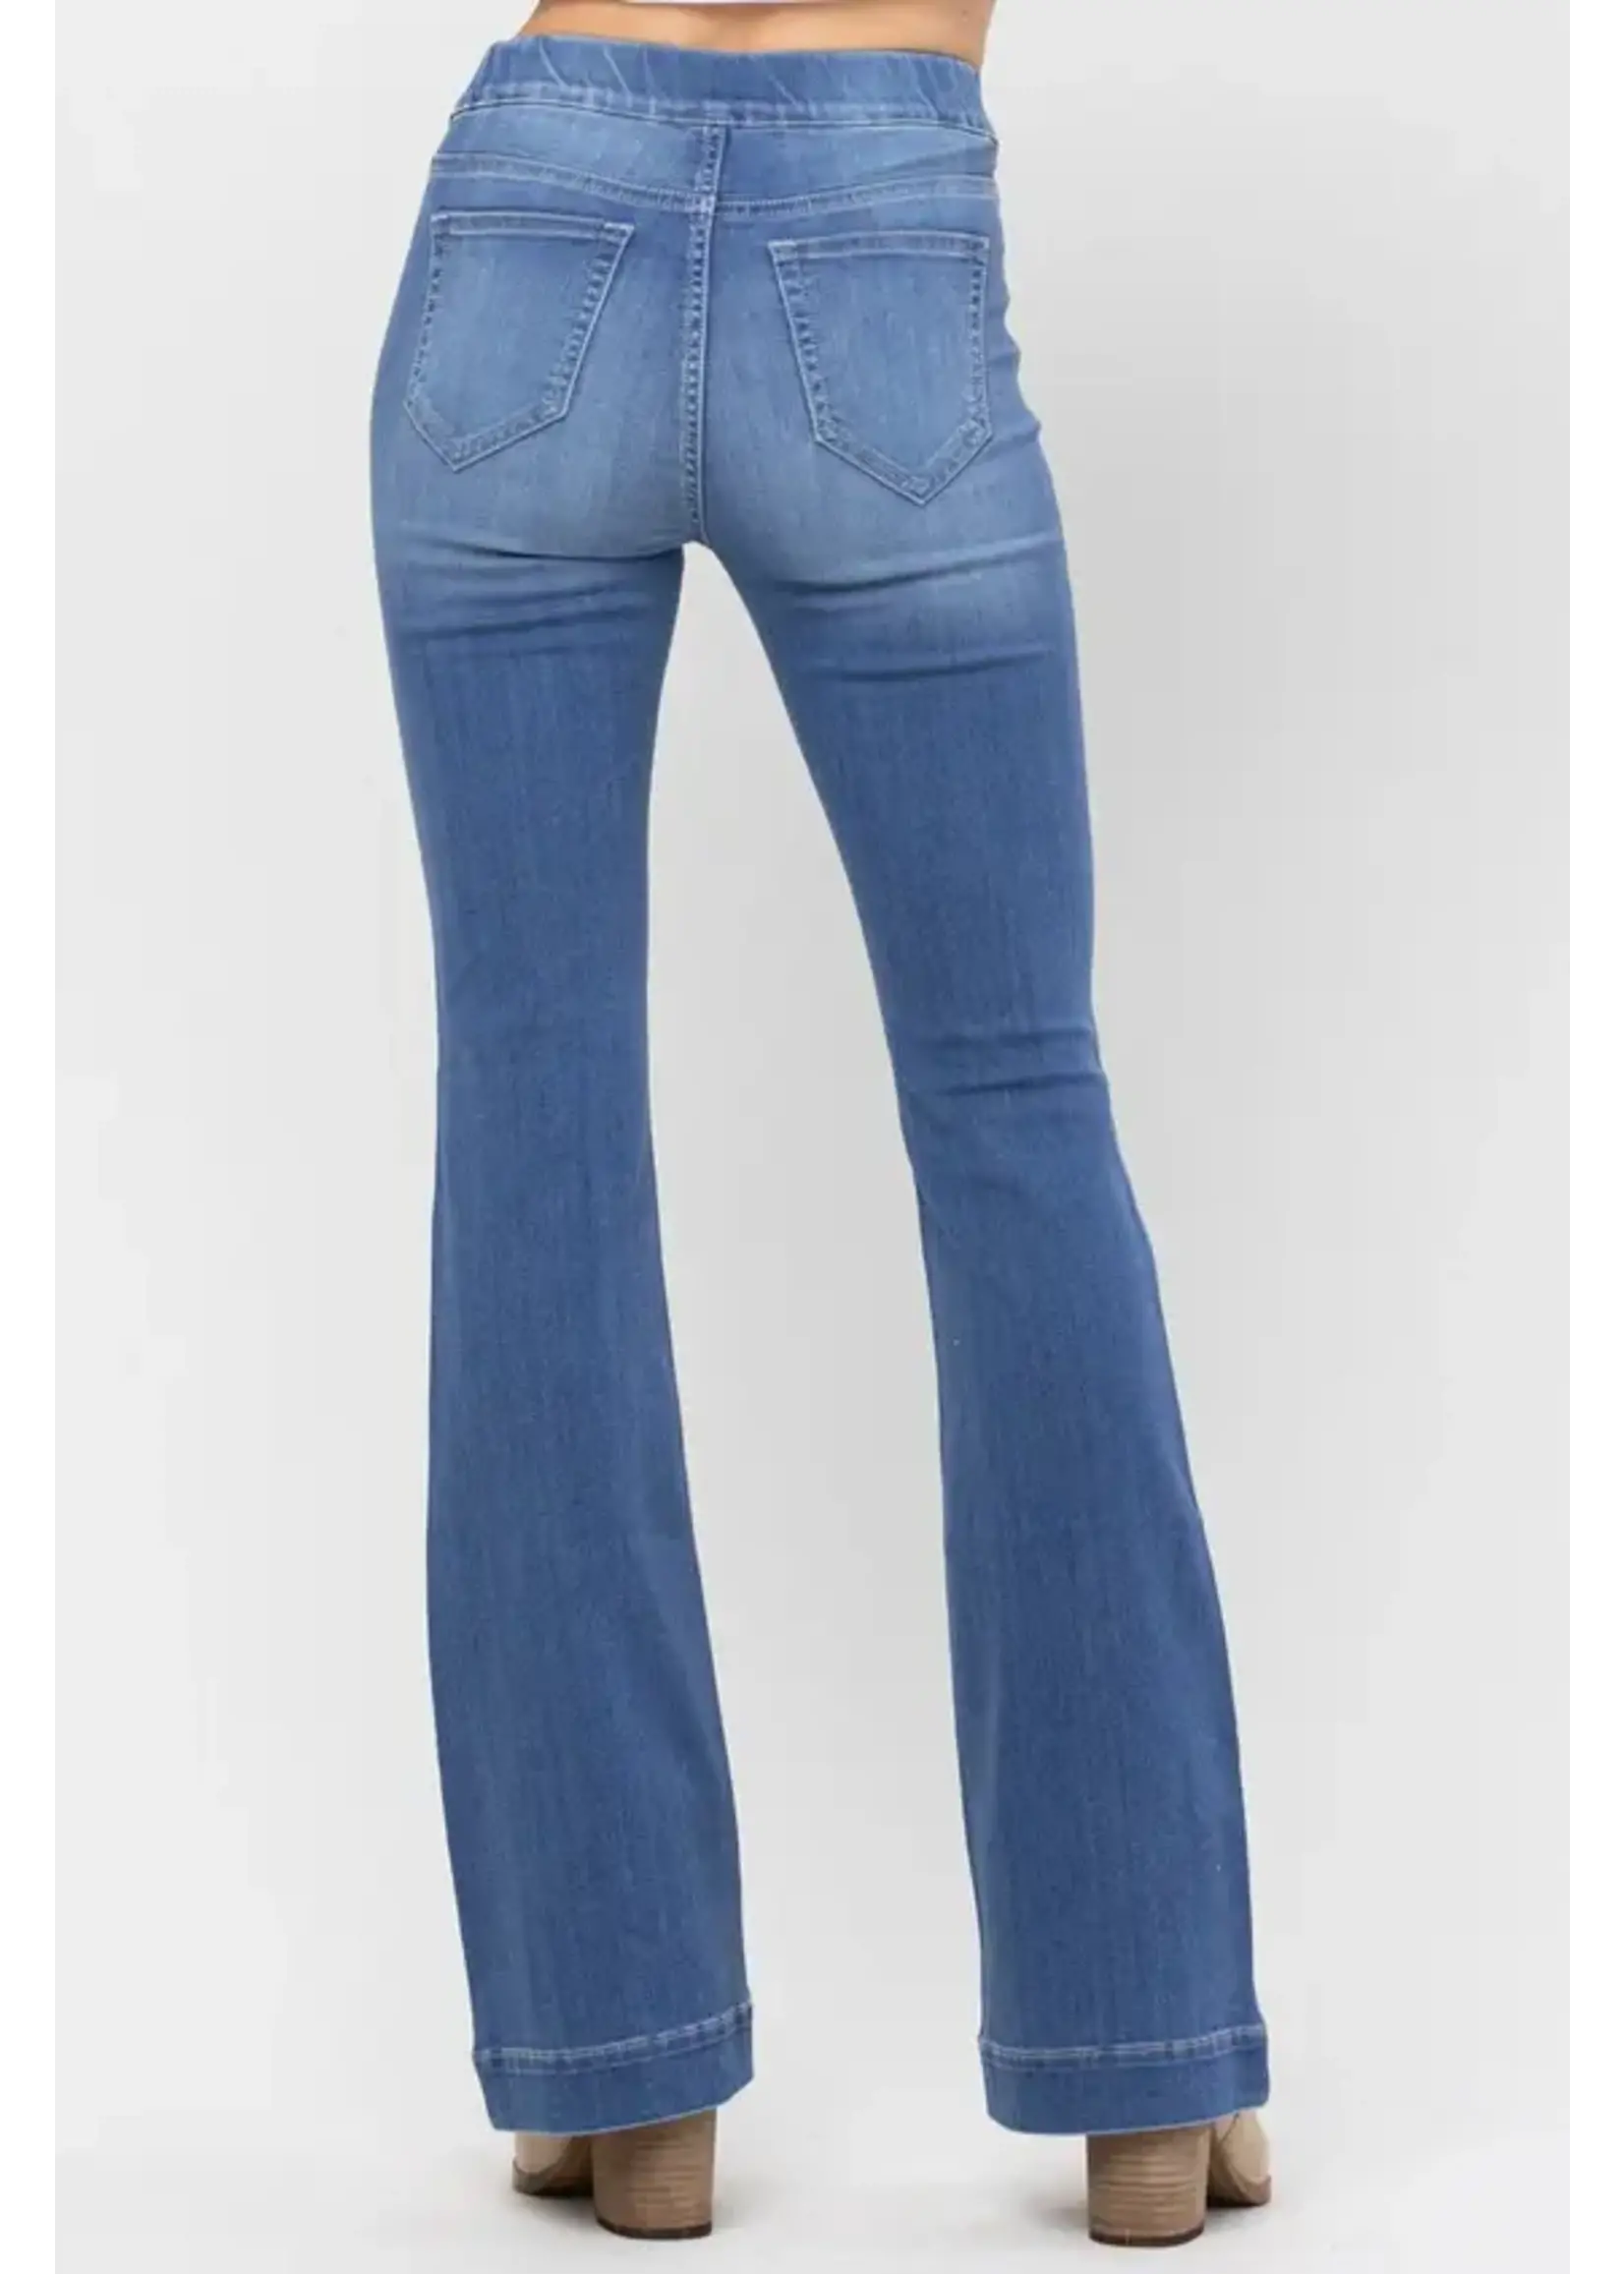 Jelly Jeans Mid Rise Pull On Flare